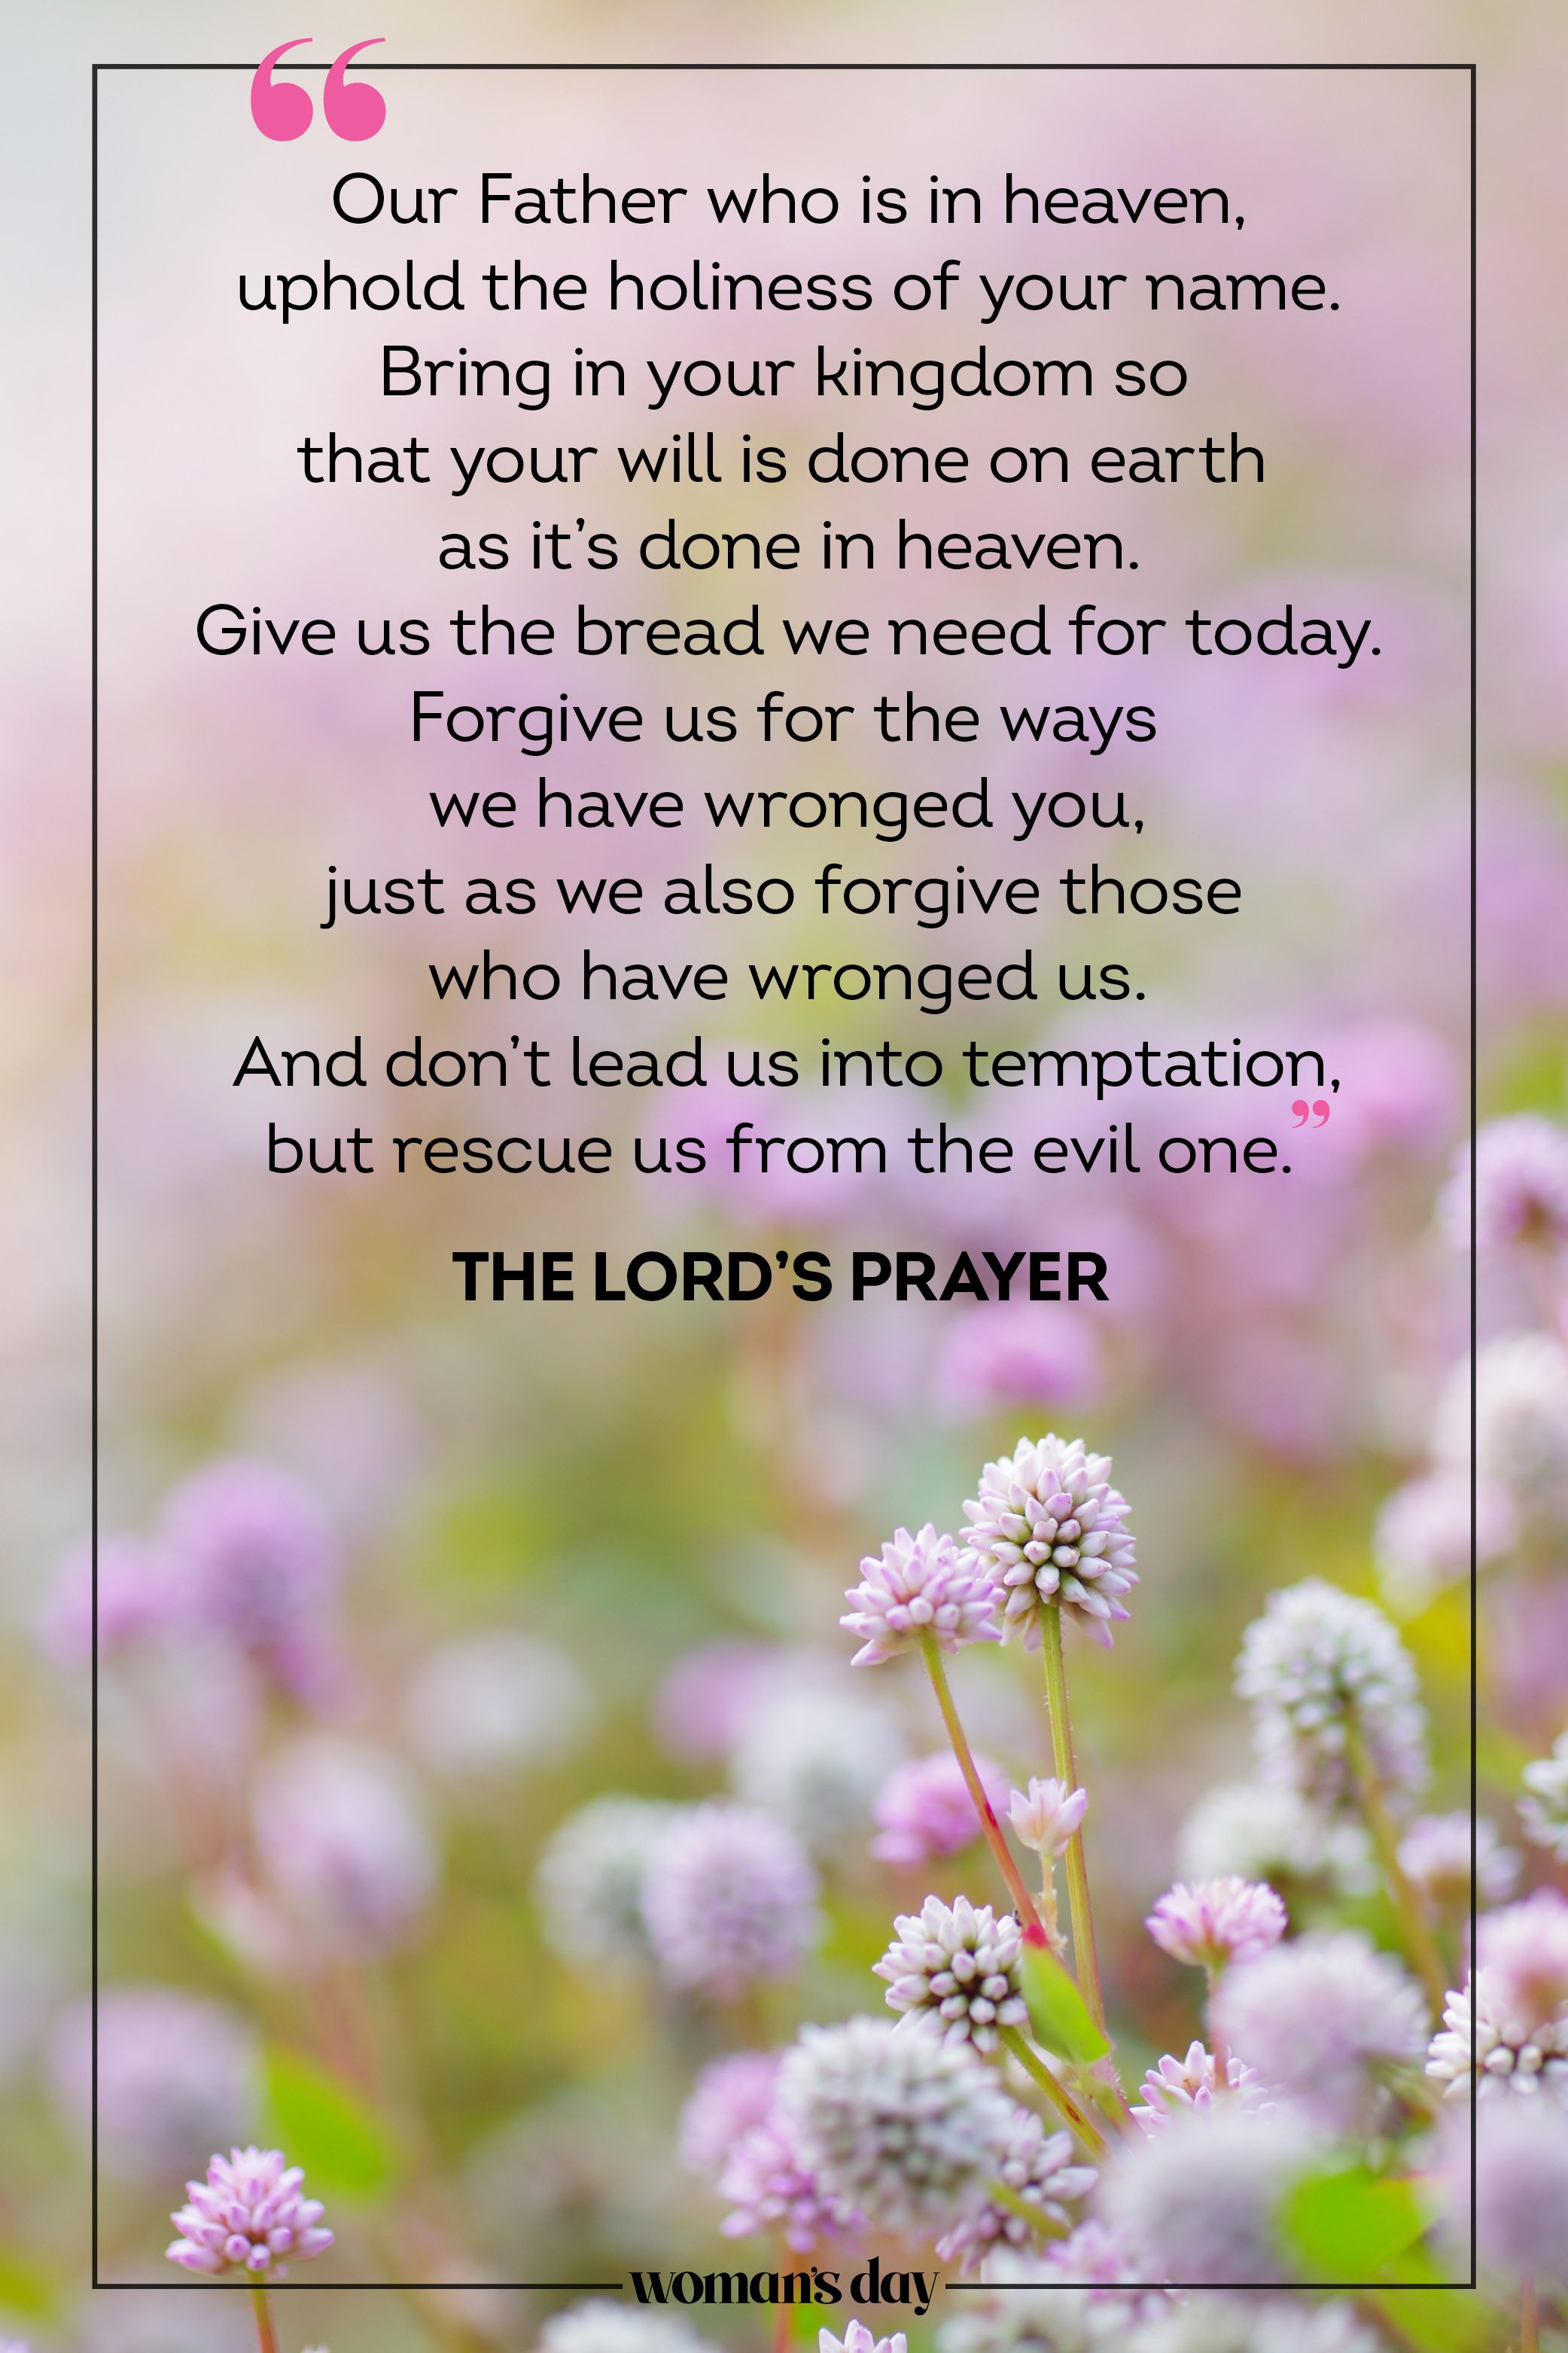 The Lord's Prayer: A Biblical Guide for Meaning and Application